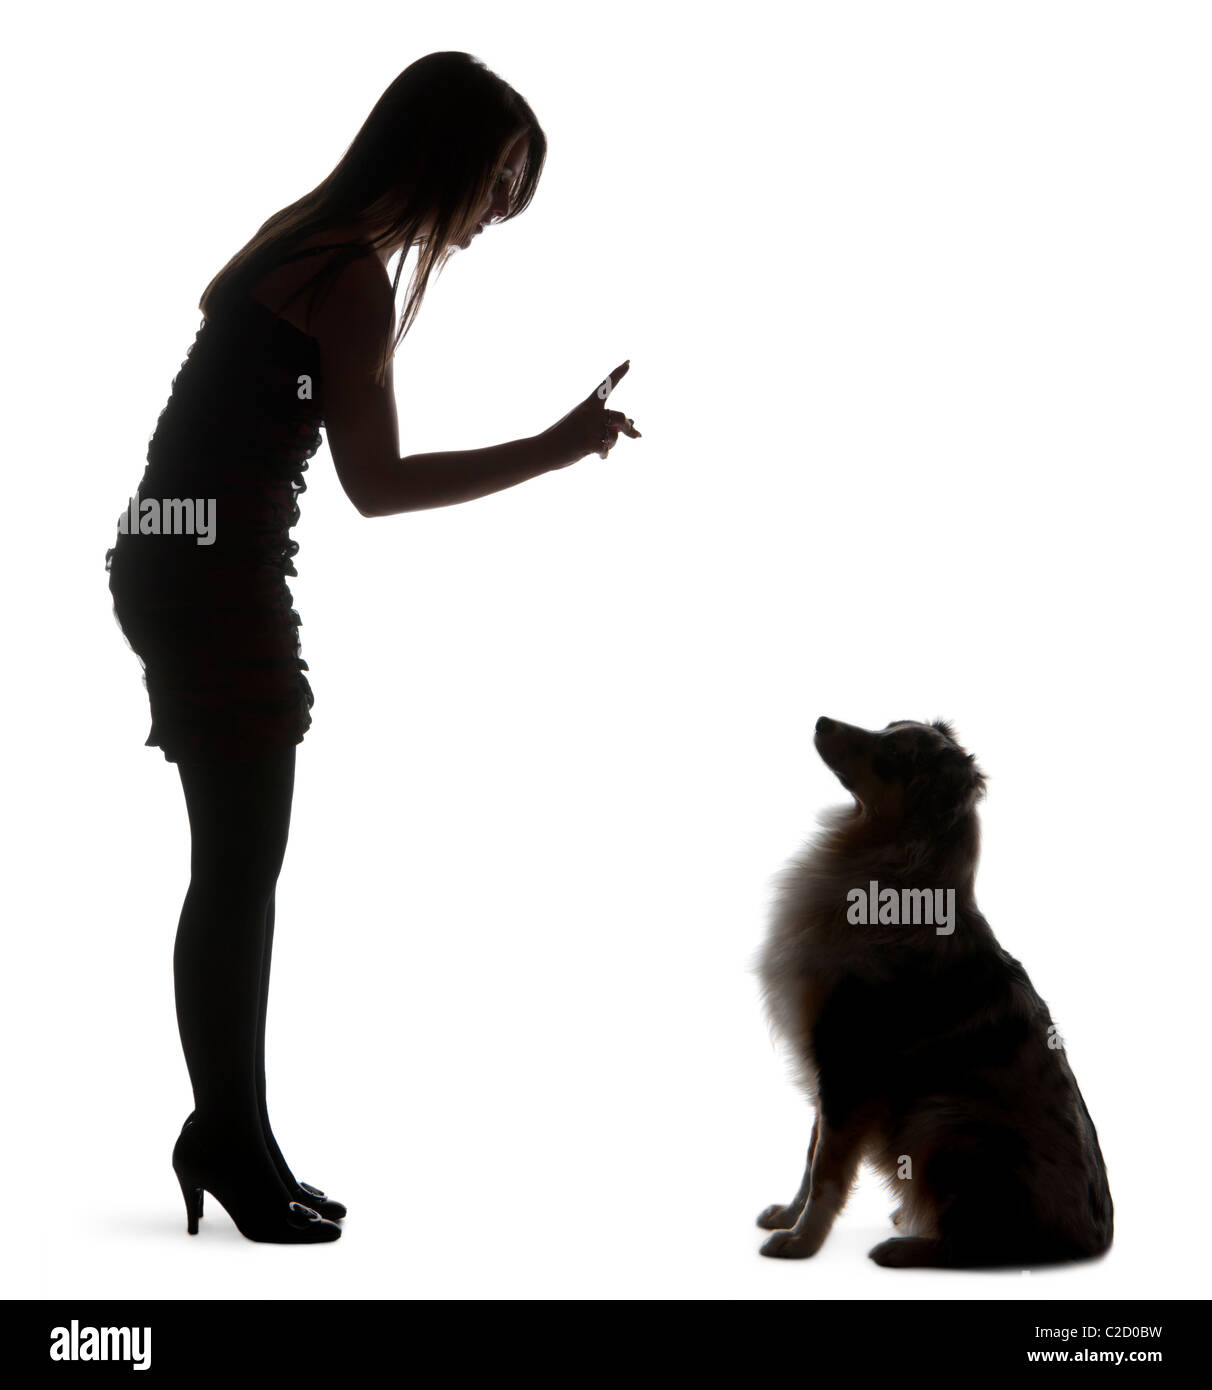 Young woman training Australian Shepherd dog in front of white background Stock Photo